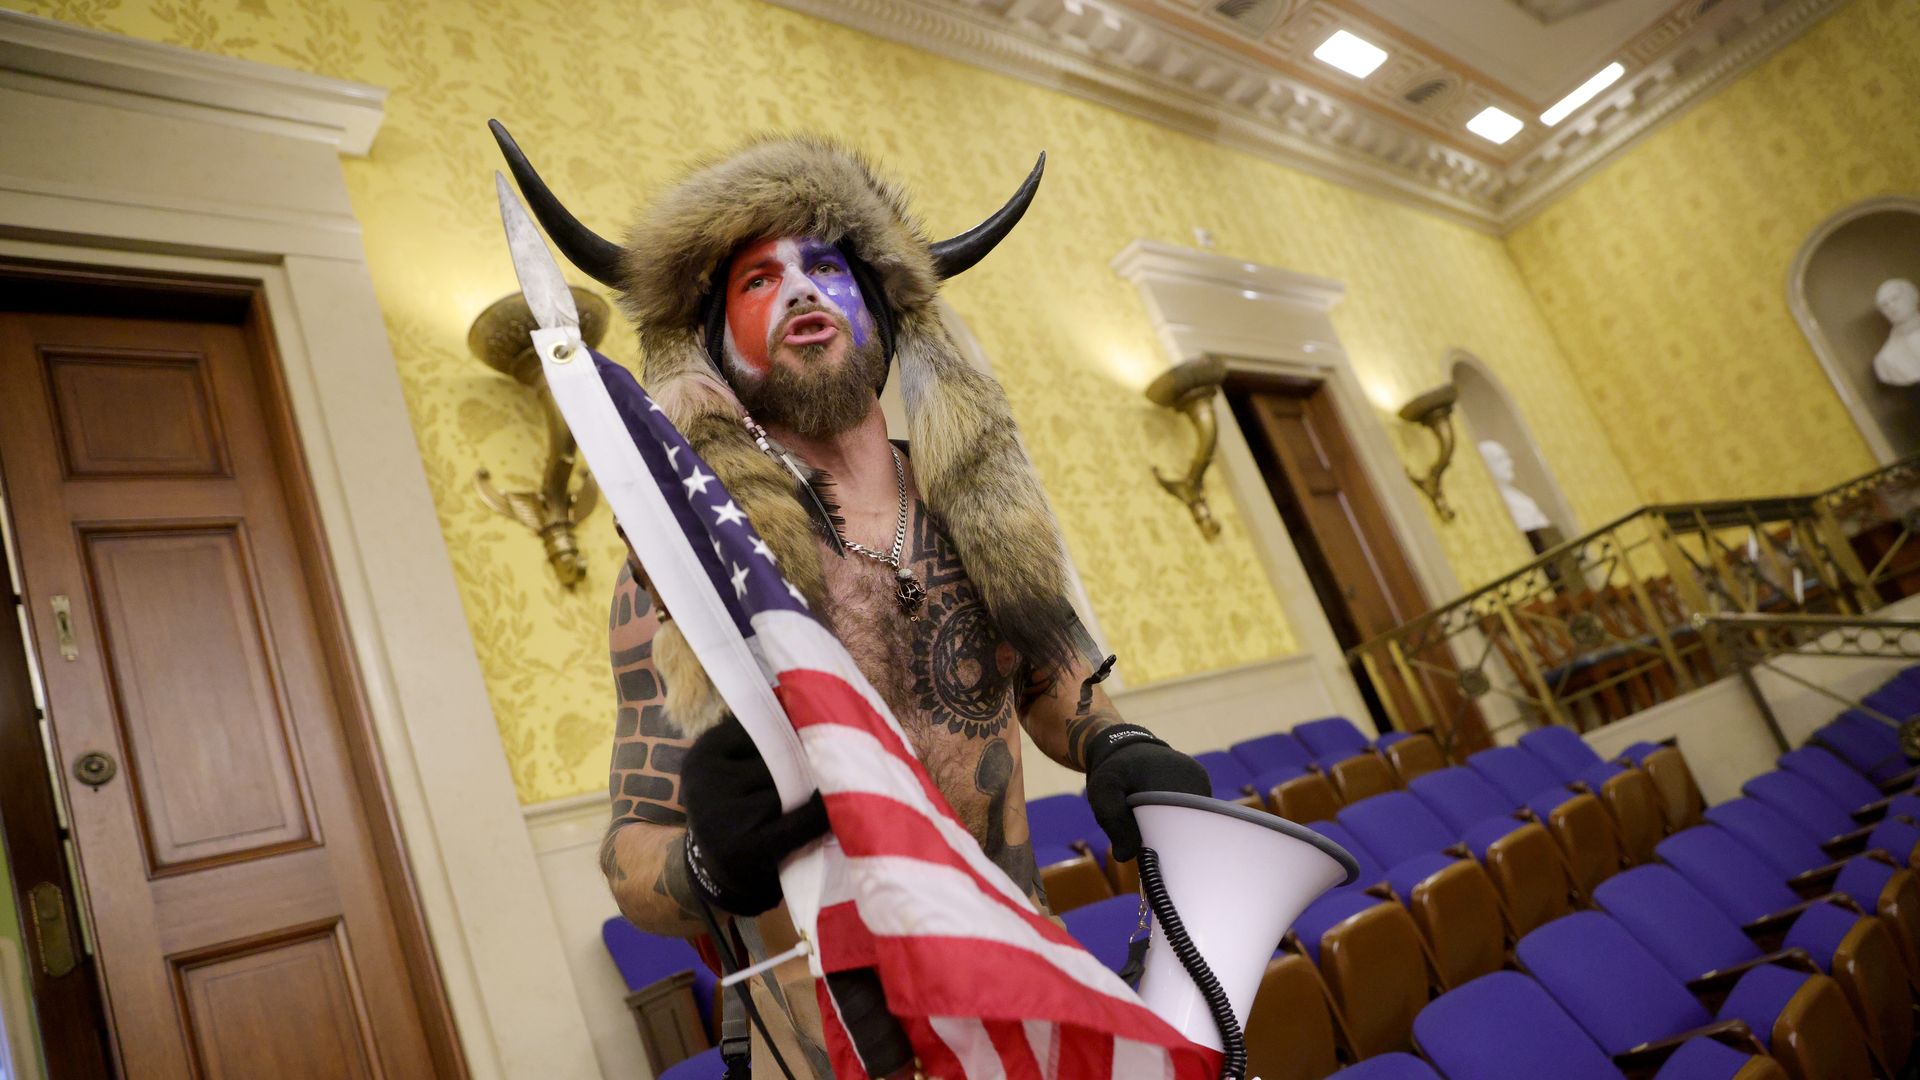 Photo of the QAnon shaman in the Senate chamber holding an American flag and wearing horns